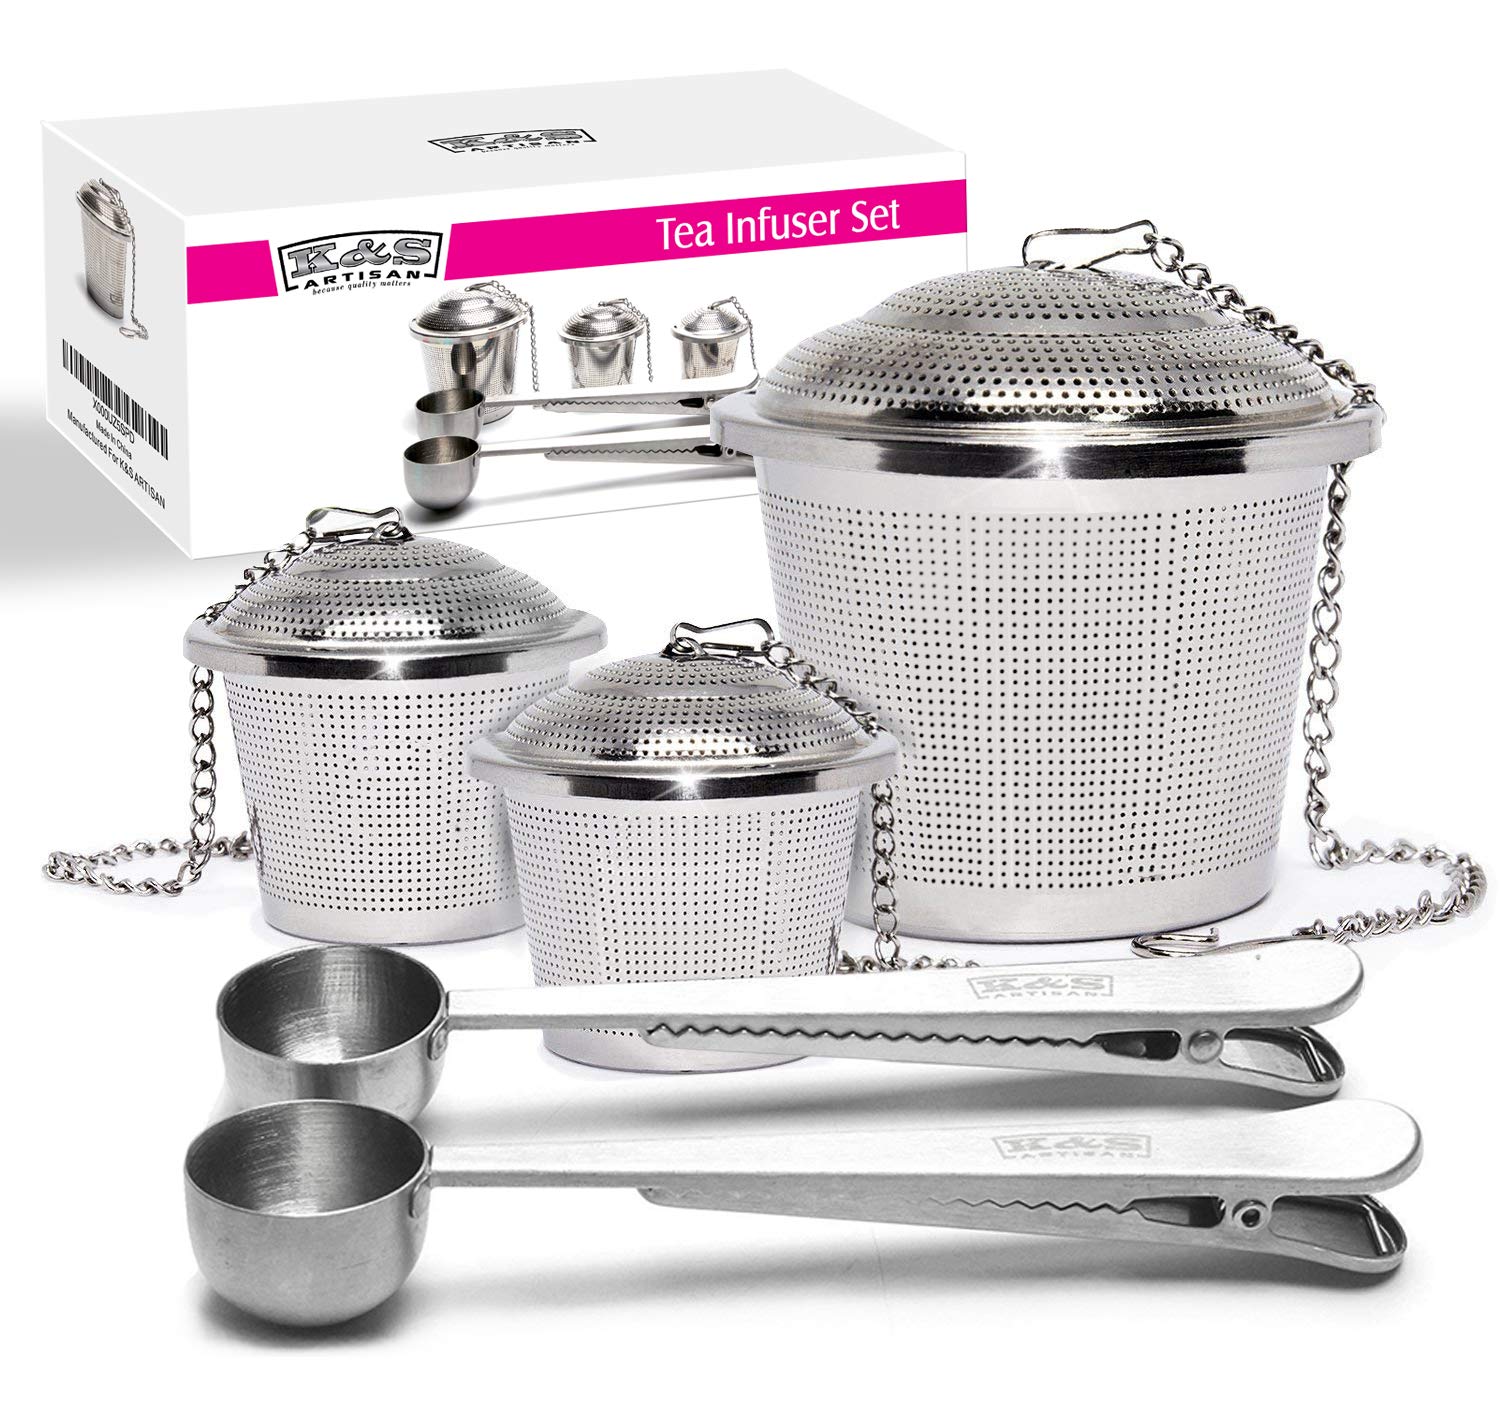 Tea Infuser Set Ultra Fine 304 Stainless Steel Strainers & Steepers Superior Quality 2 Single Cup Infusers + 1 Large Infuser, and 2 Bonus Quality Scoops with Bag Clip - Tea Steeper for Loose Tea